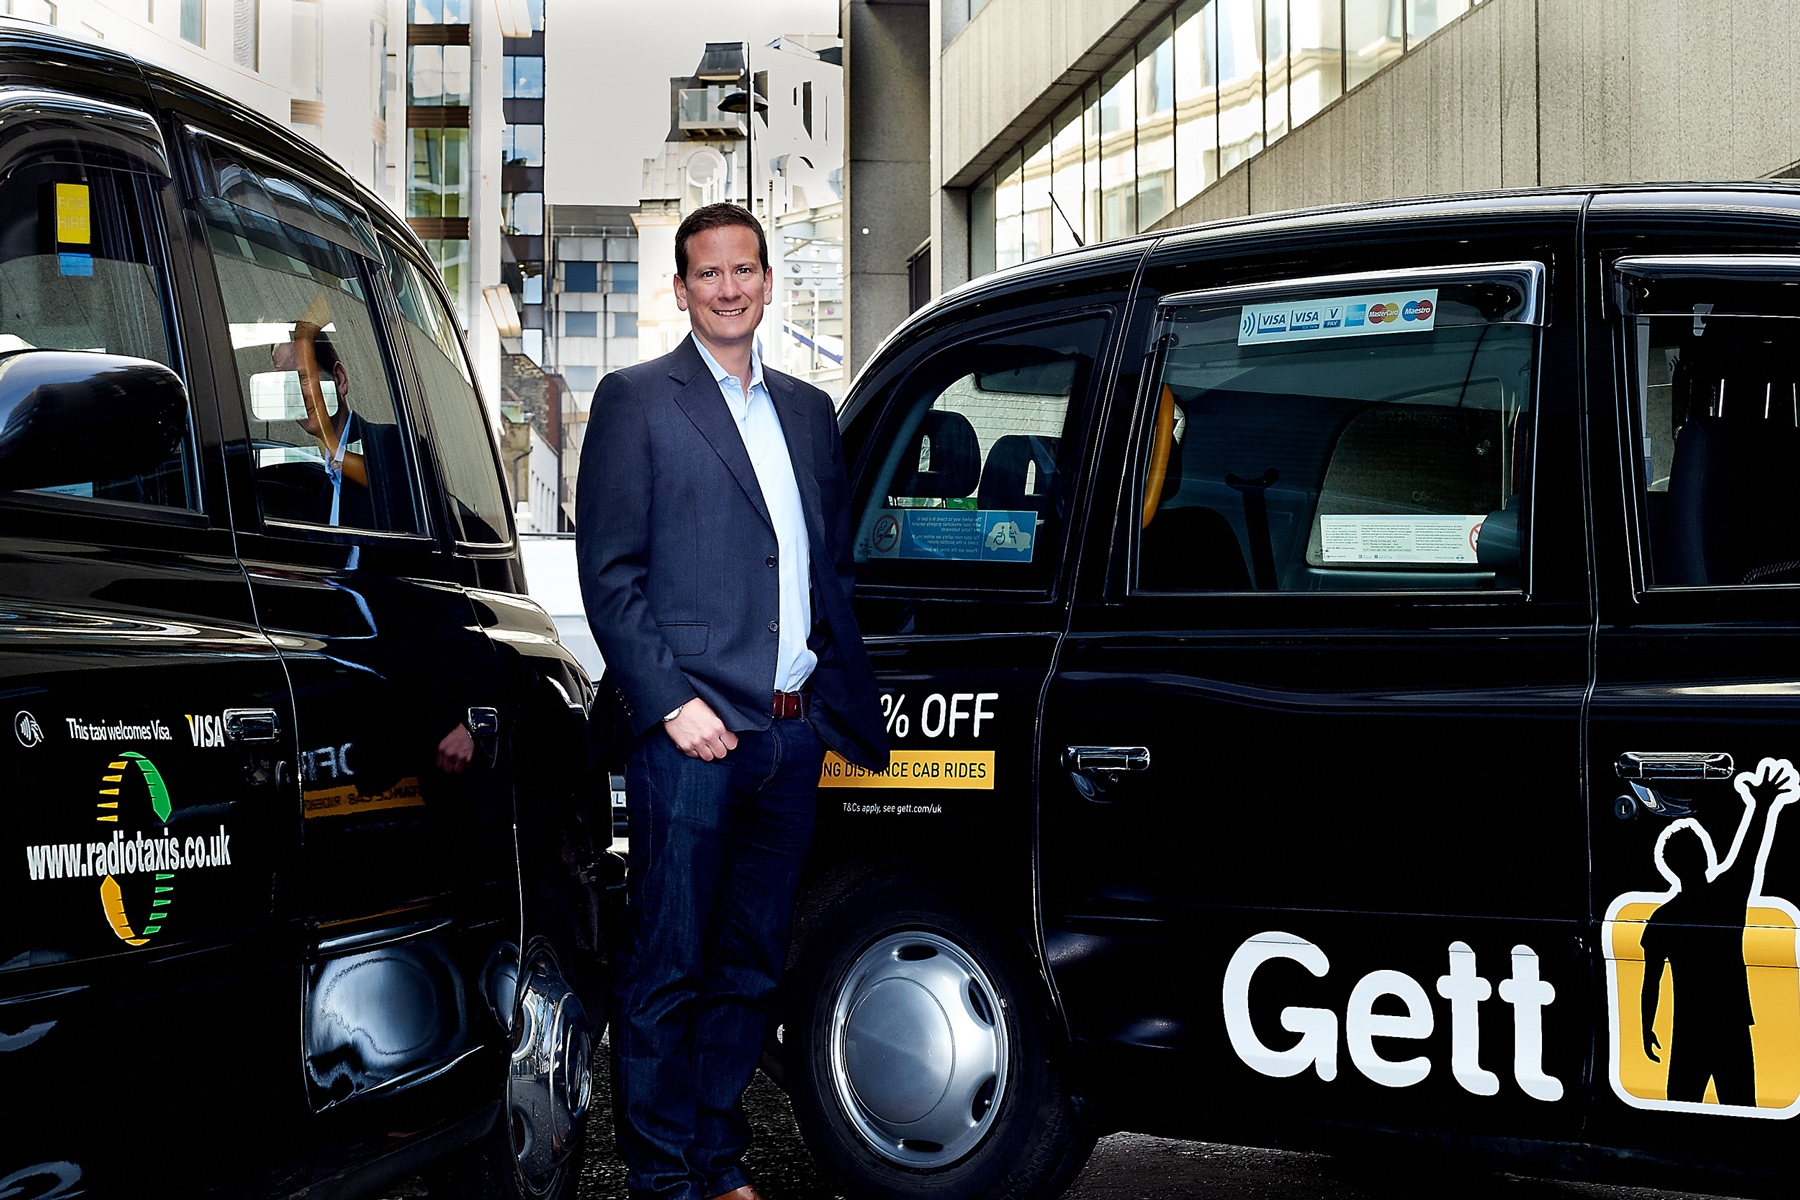 Gett is using Citymapper data to plot new ride-sharing routes | DeviceDaily.com